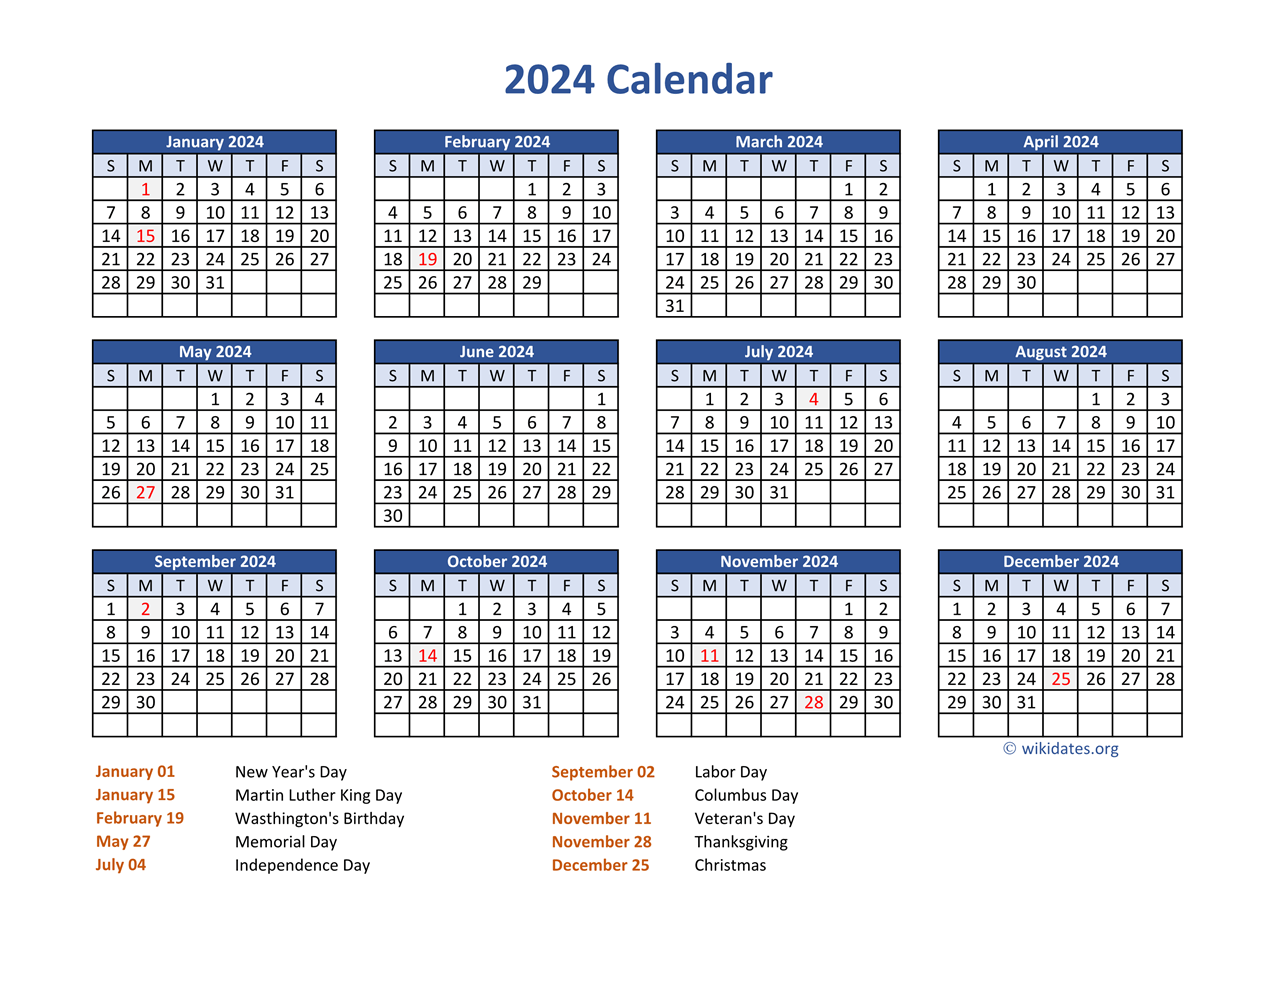 Pdf Calendar 2024 With Federal Holidays | Wikidates for Calendar For 2024 With Holidays Printable